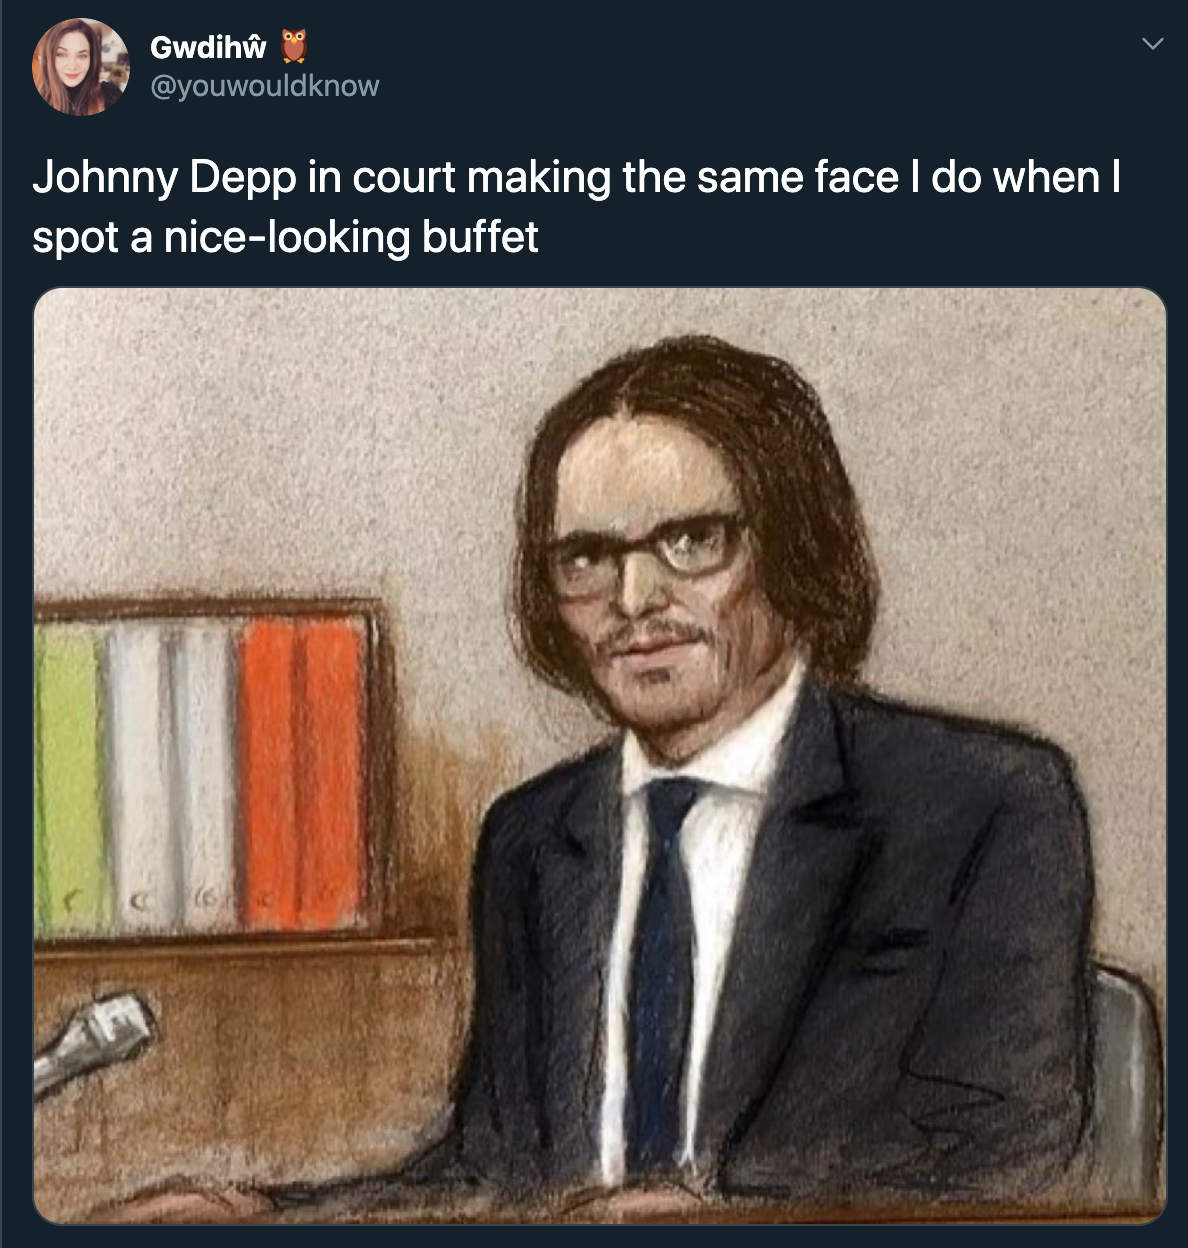 Johnny Depp in court making the same face l do when I spot a nice looking buffet